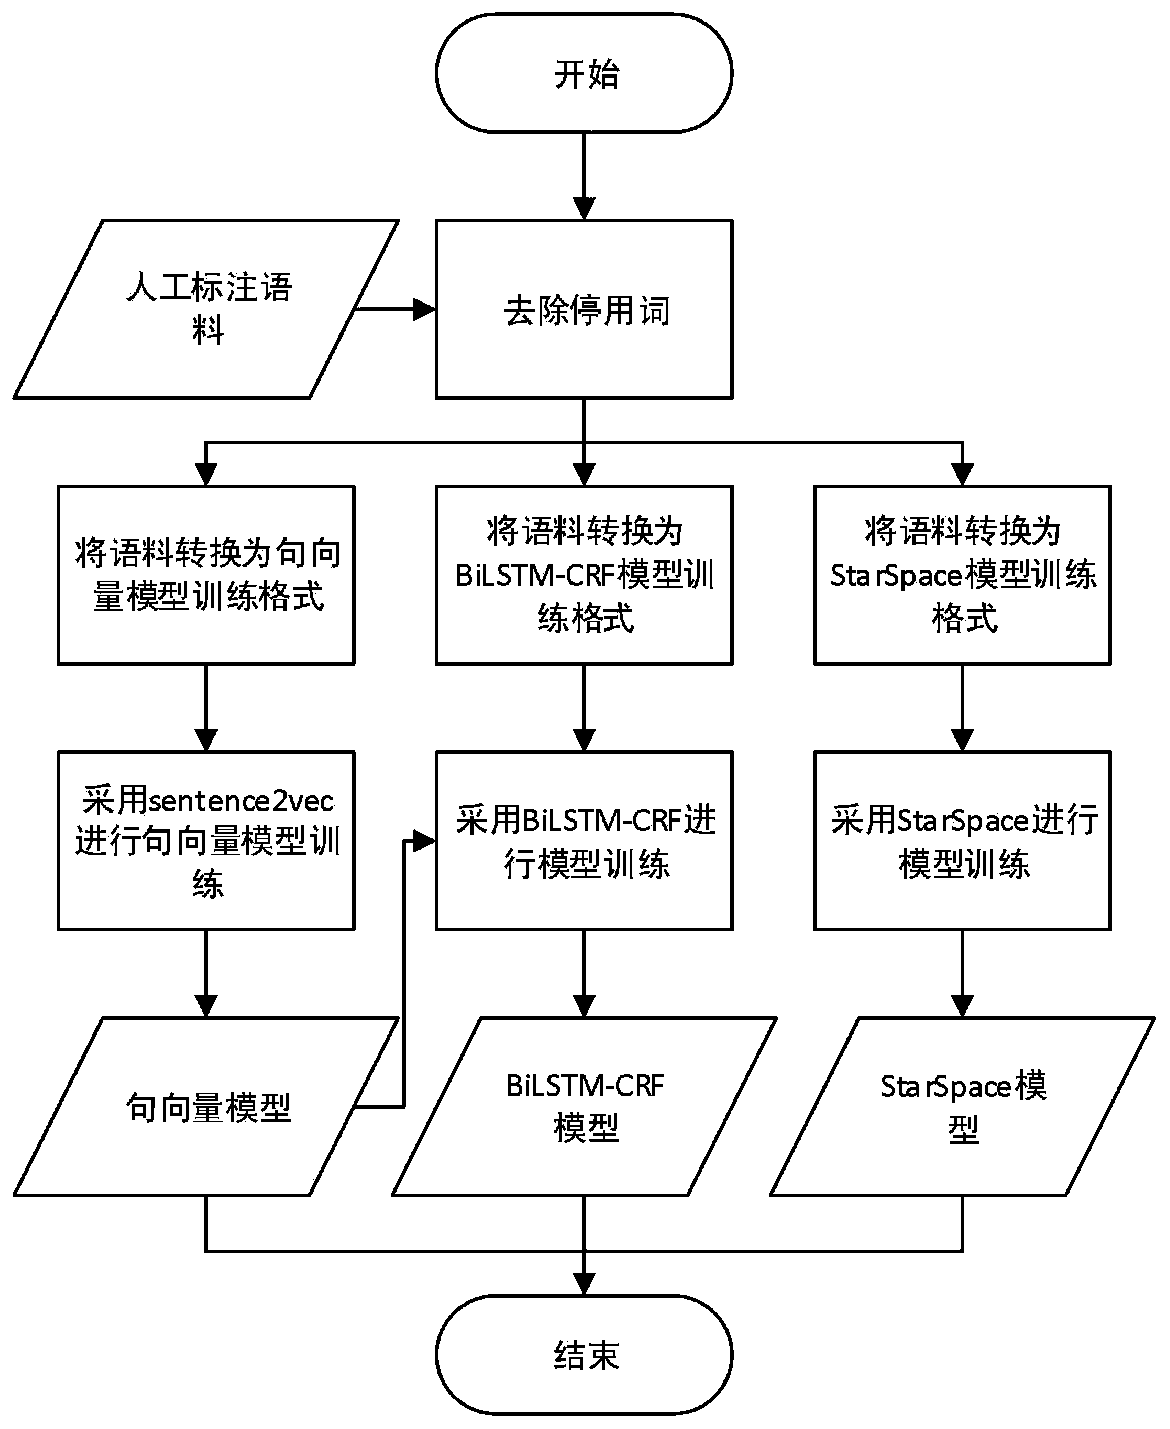 Multi-round dialogue intention recognition method